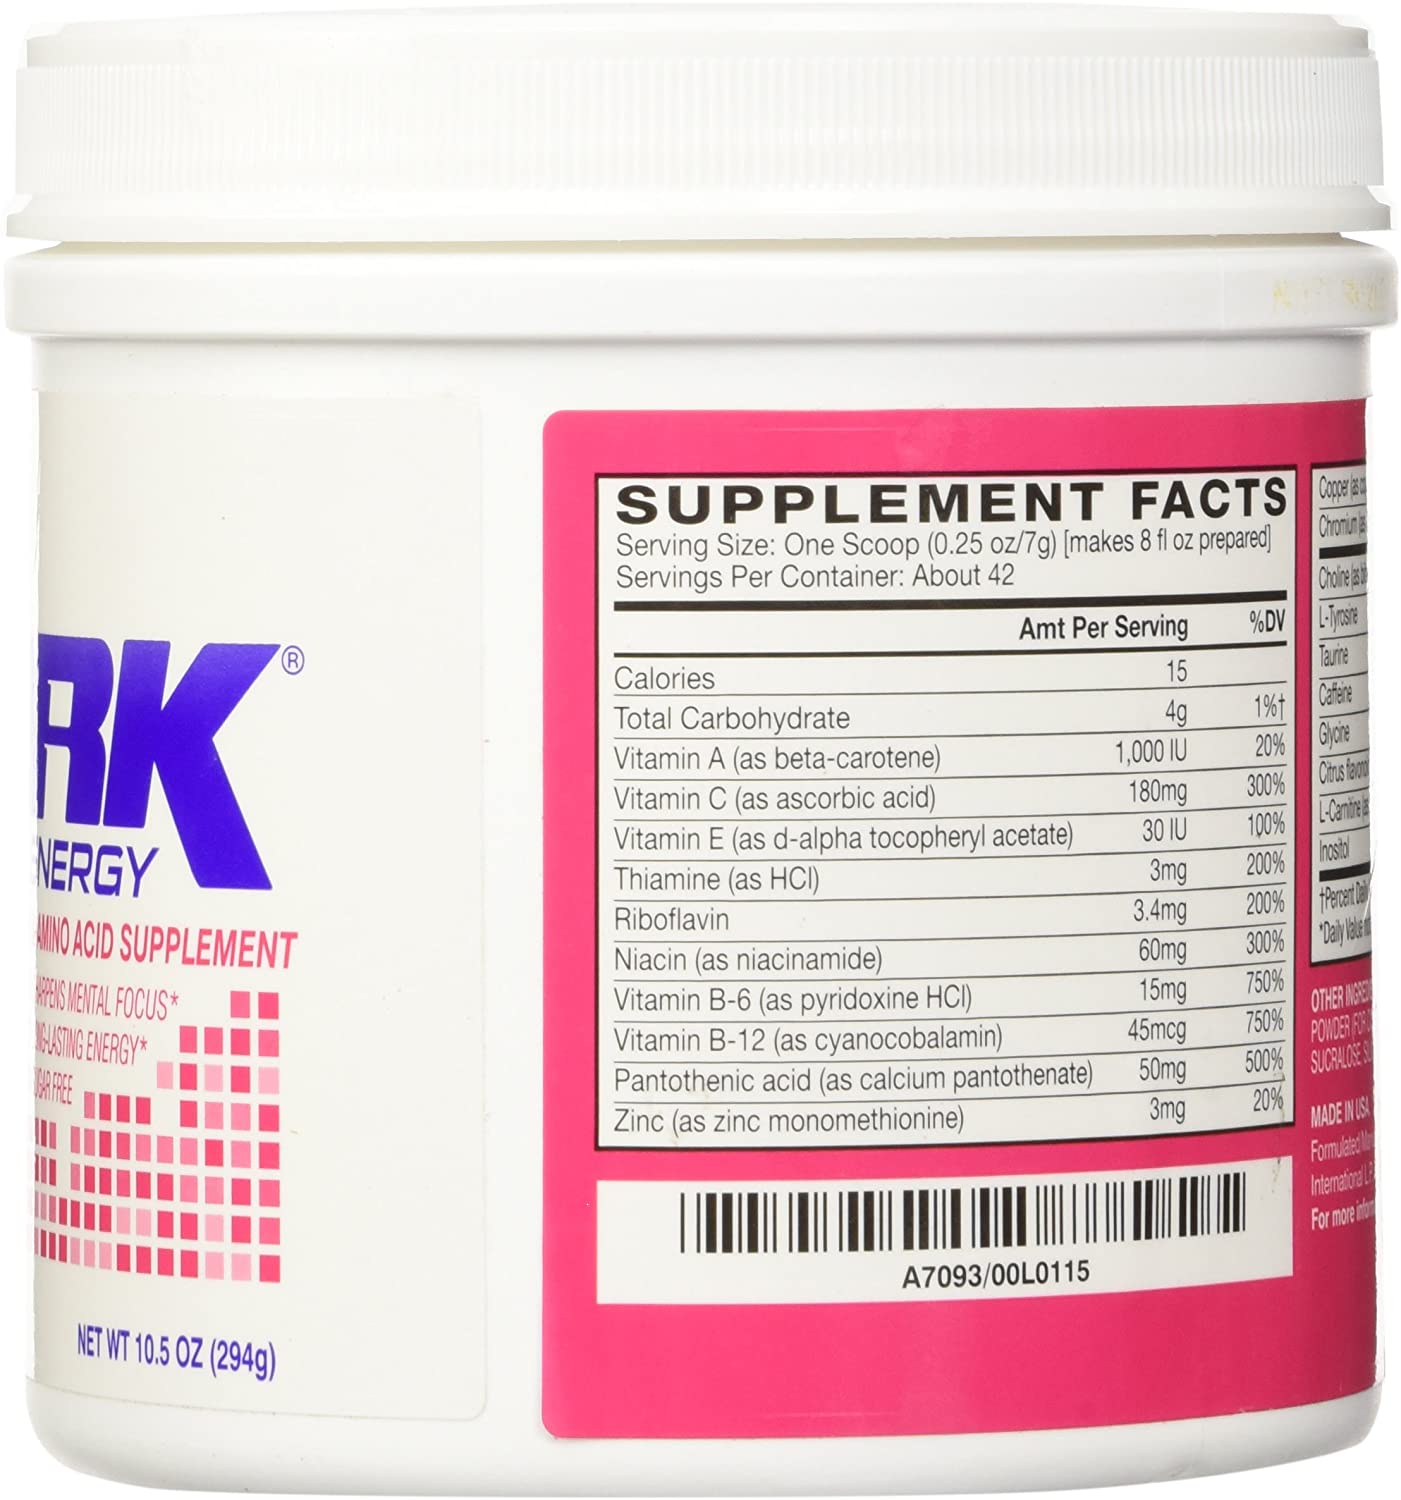 Spark pre workout ingredients and supplement facts